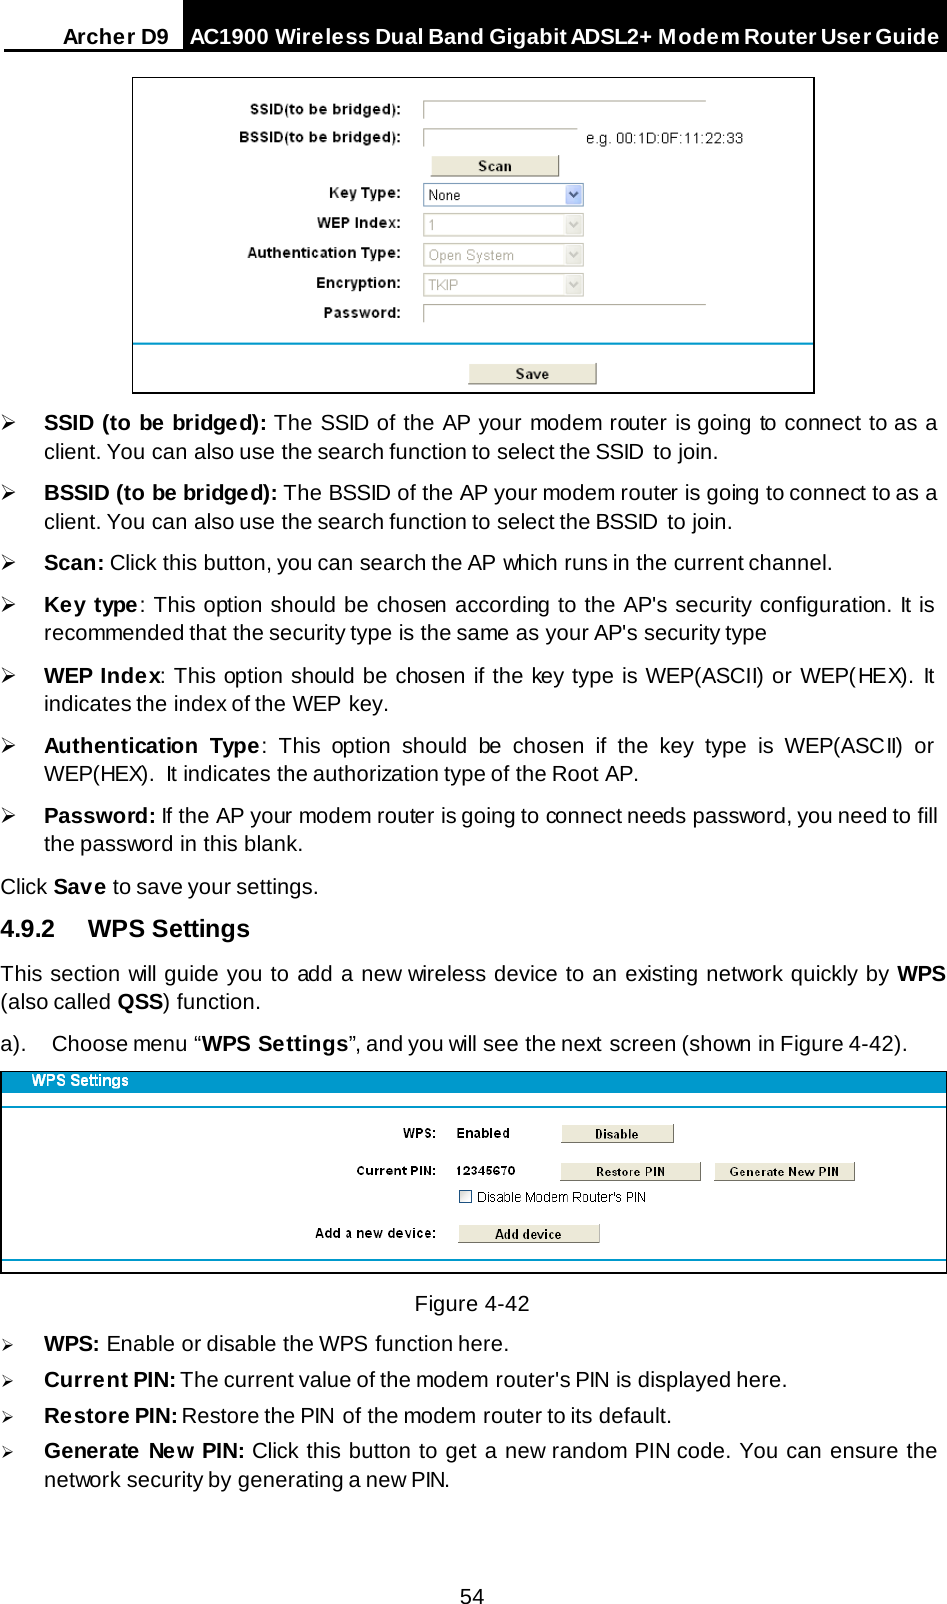 Arche r D9 AC1900 Wireless Dual Band Gigabit ADSL2+ Modem Router User Guide    SSID (to be bridged): The SSID of the AP your modem router is going to connect to as a client. You can also use the search function to select the SSID  to join.  BSSID (to be bridged): The BSSID of the AP your modem router is going to connect to as a client. You can also use the search function to select the BSSID  to join.  Scan: Click this button, you can search the AP  which runs in the current channel.  Key type: This option should be chosen according to the AP&apos;s security configuration. It is recommended that the security type is the same as your AP&apos;s security type  WEP Index: This option should be chosen if the key type is WEP(ASCII) or WEP(HEX). It indicates the index of the WEP key.  Authentication Type: This option should be chosen if the key type is WEP(ASCII) or WEP(HEX).  It indicates the authorization type of the Root AP.  Password: If the AP your modem router is going to connect needs password, you need to fill the password in this blank. Click Save to save your settings. 4.9.2 WPS Settings This section will guide you to add a new wireless device to an existing network quickly by WPS (also called QSS) function. a). Choose menu “WPS Settings”, and you will see the next  screen (shown in Figure 4-42).   Figure 4-42  WPS: Enable or disable the WPS function here.    Current PIN: The current value of the modem router&apos;s PIN is displayed here.    Restore PIN: Restore the PIN  of the modem router to its default.    Generate New PIN: Click this button to get a new random PIN code. You can ensure the network security by generating a new PIN. 54 